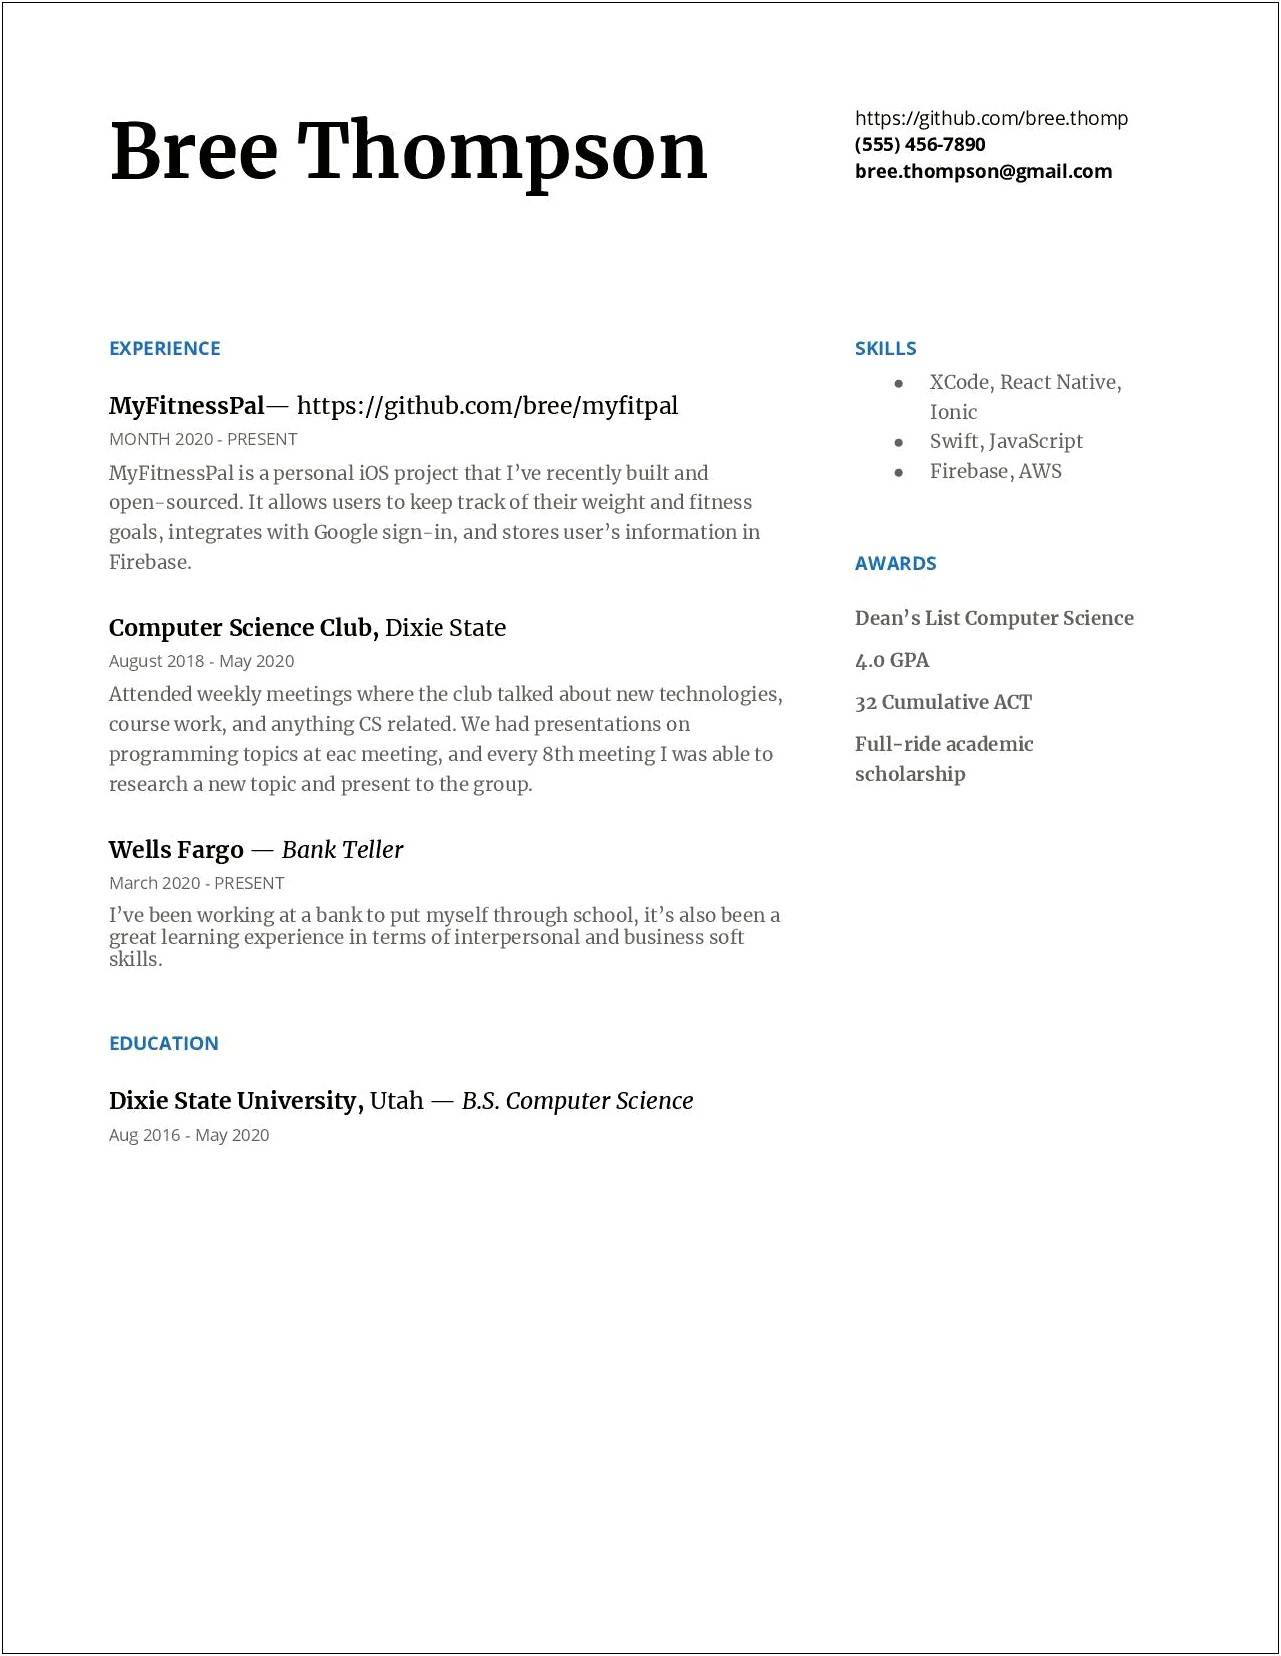 Best Resume Formats For Computer Science Students